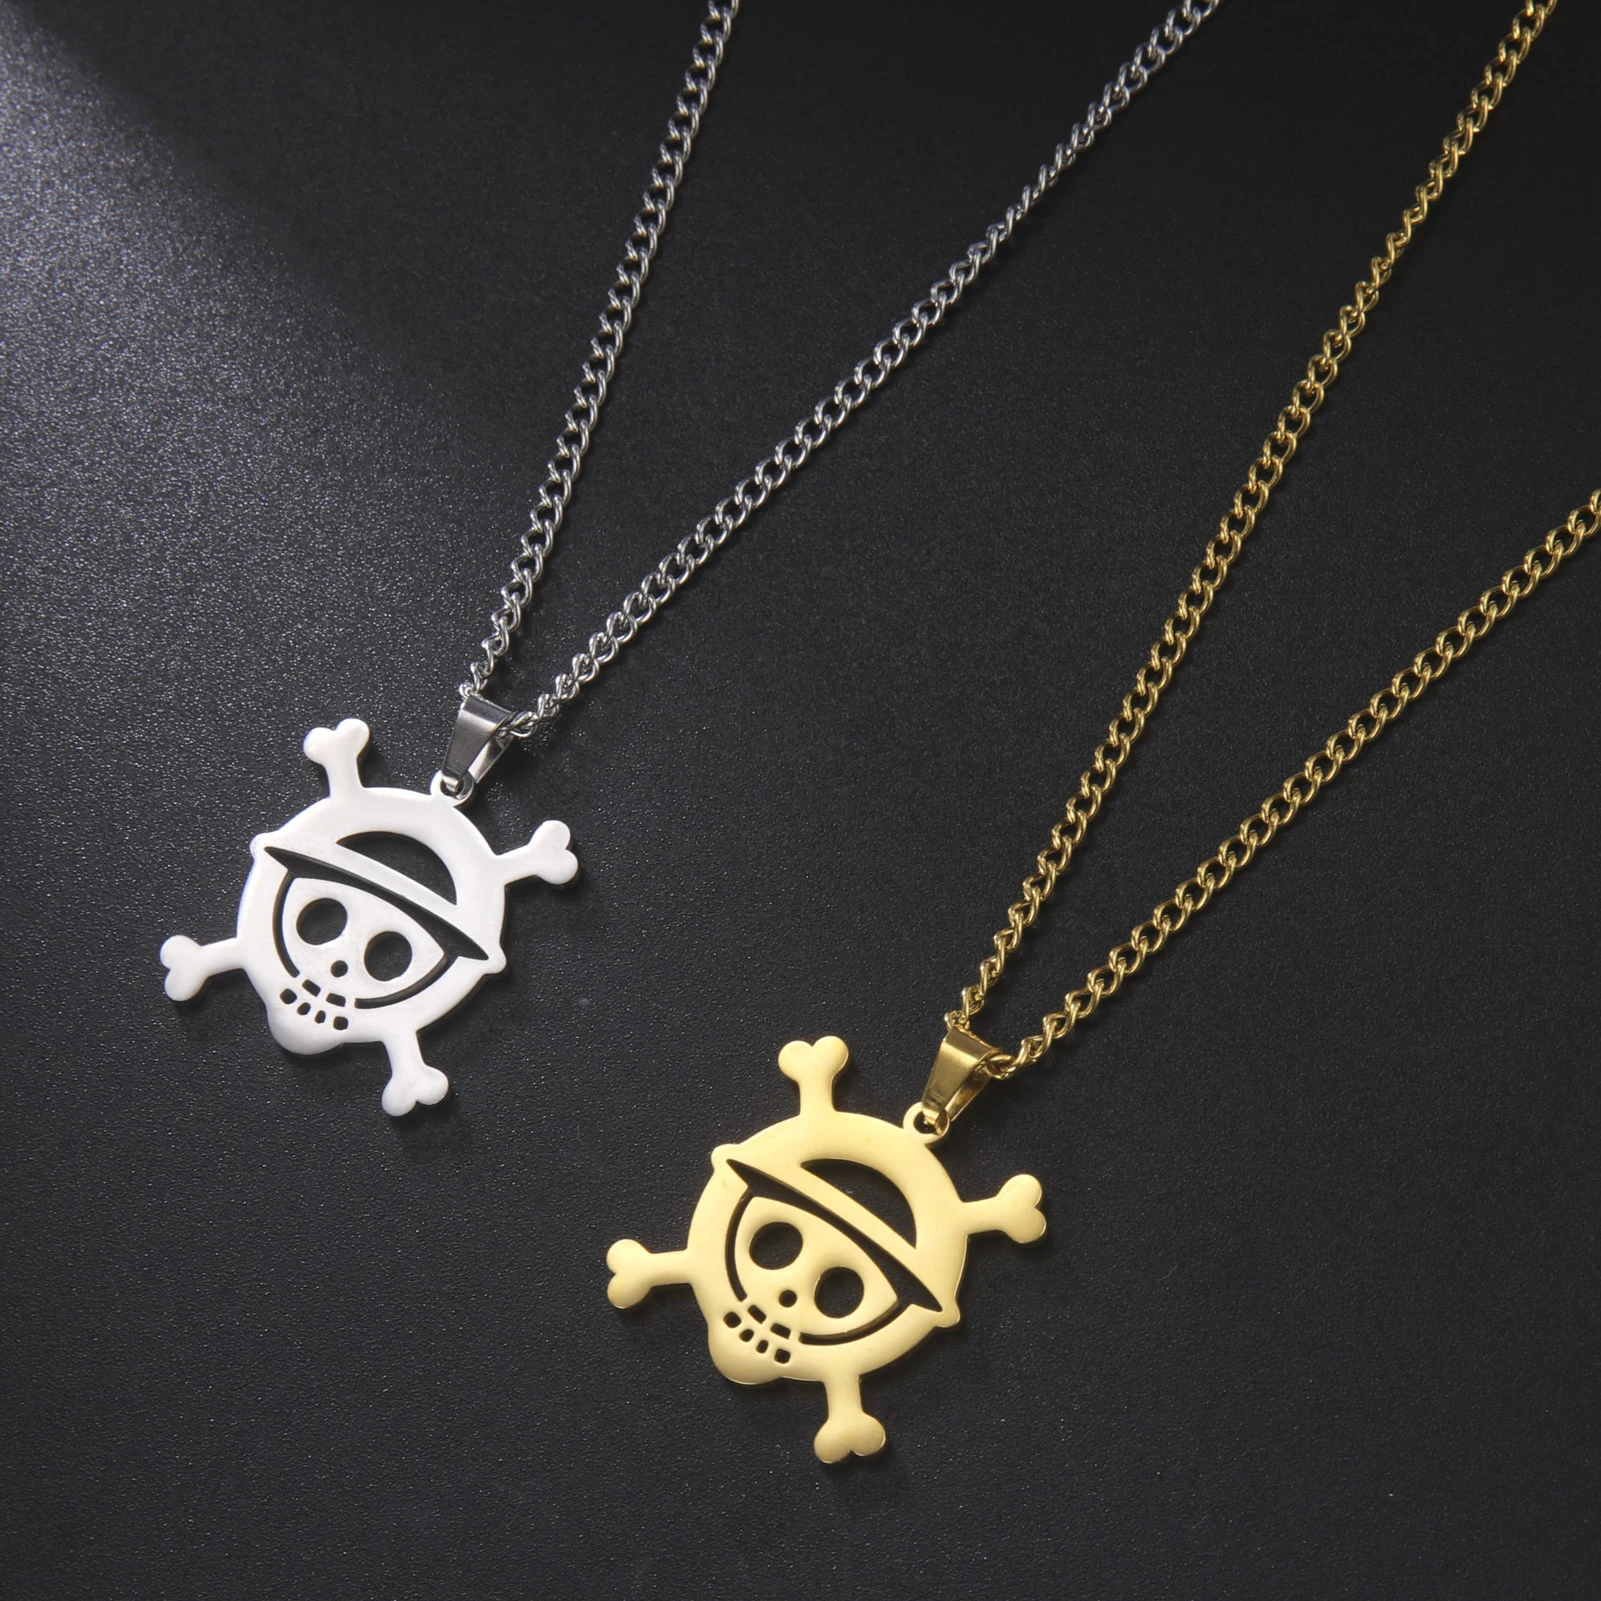 Stainless Steel Necklaces Anime Cartoon Skeleton Face Chain Fashion Choker Goth Necklace For Men Fans Jewelry - One Piece Store